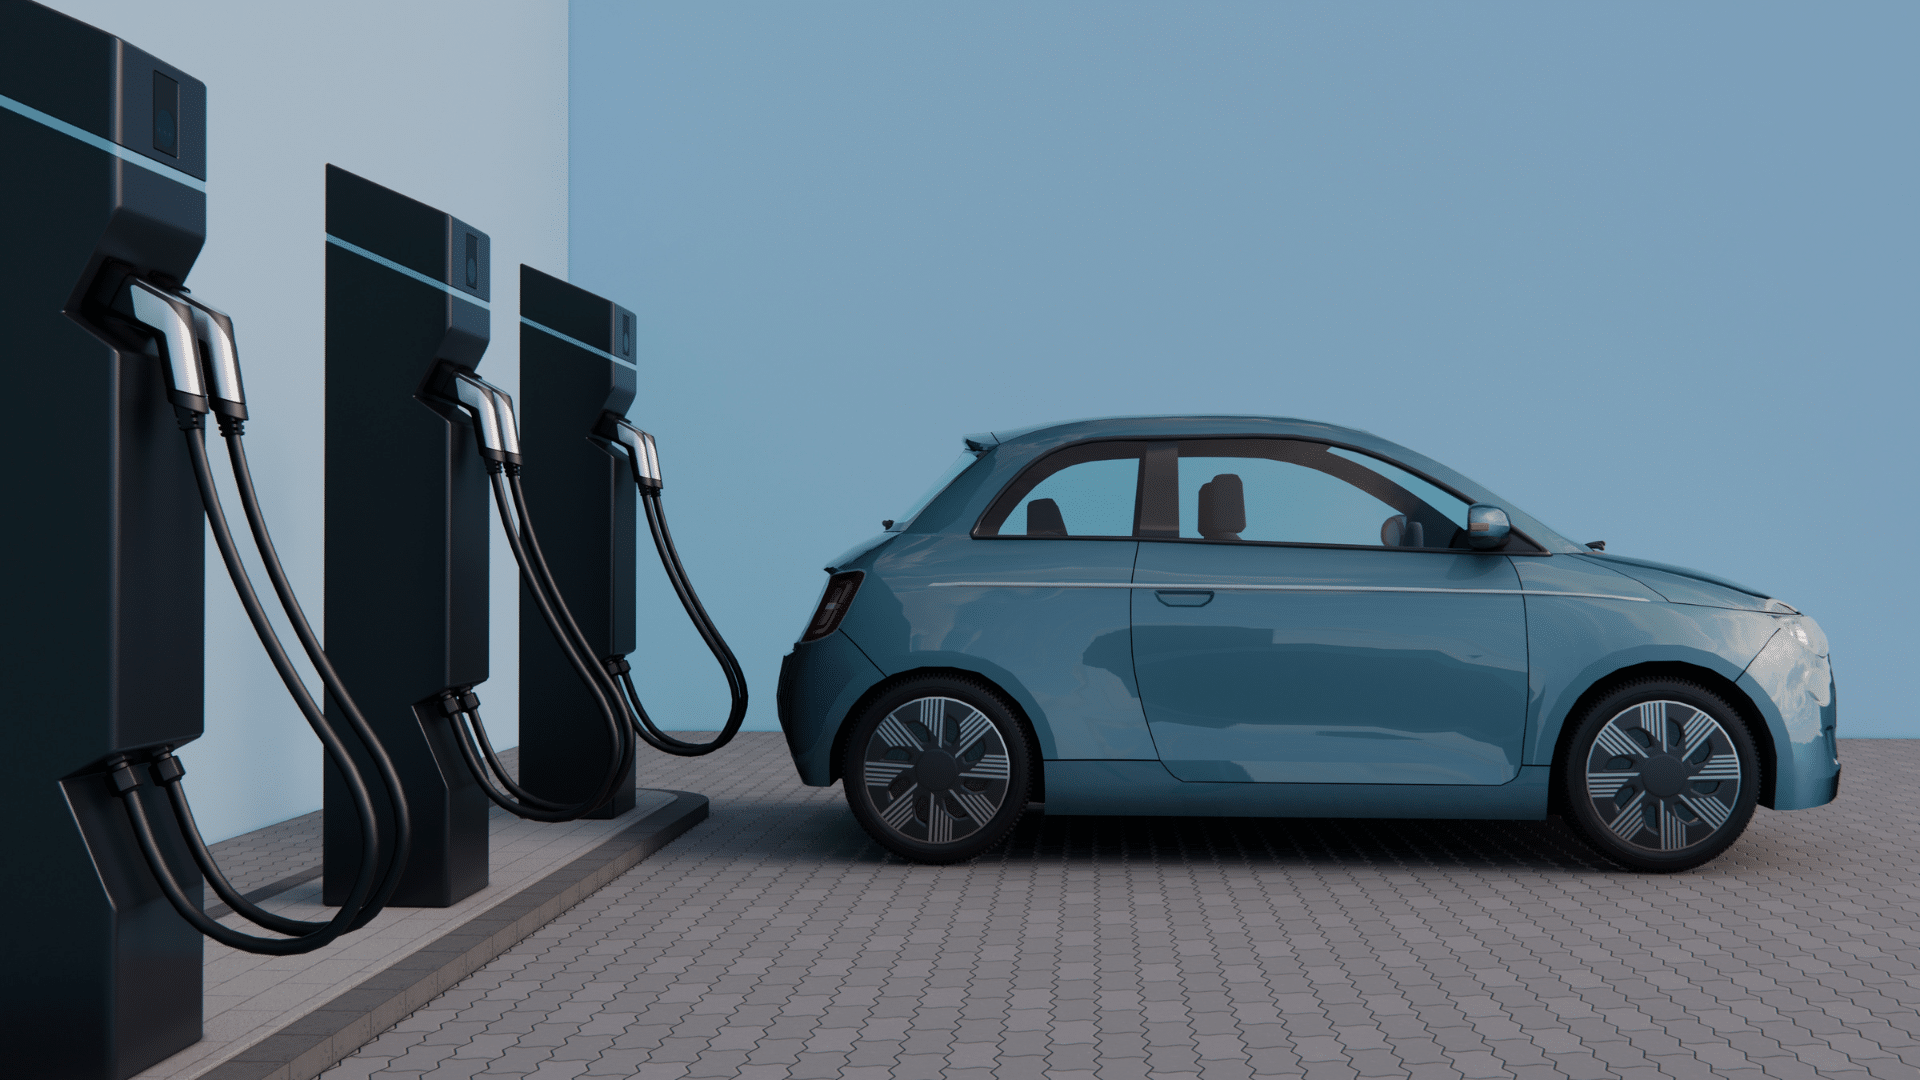 Electric Vehicle Inspection Solutions for the Modern World